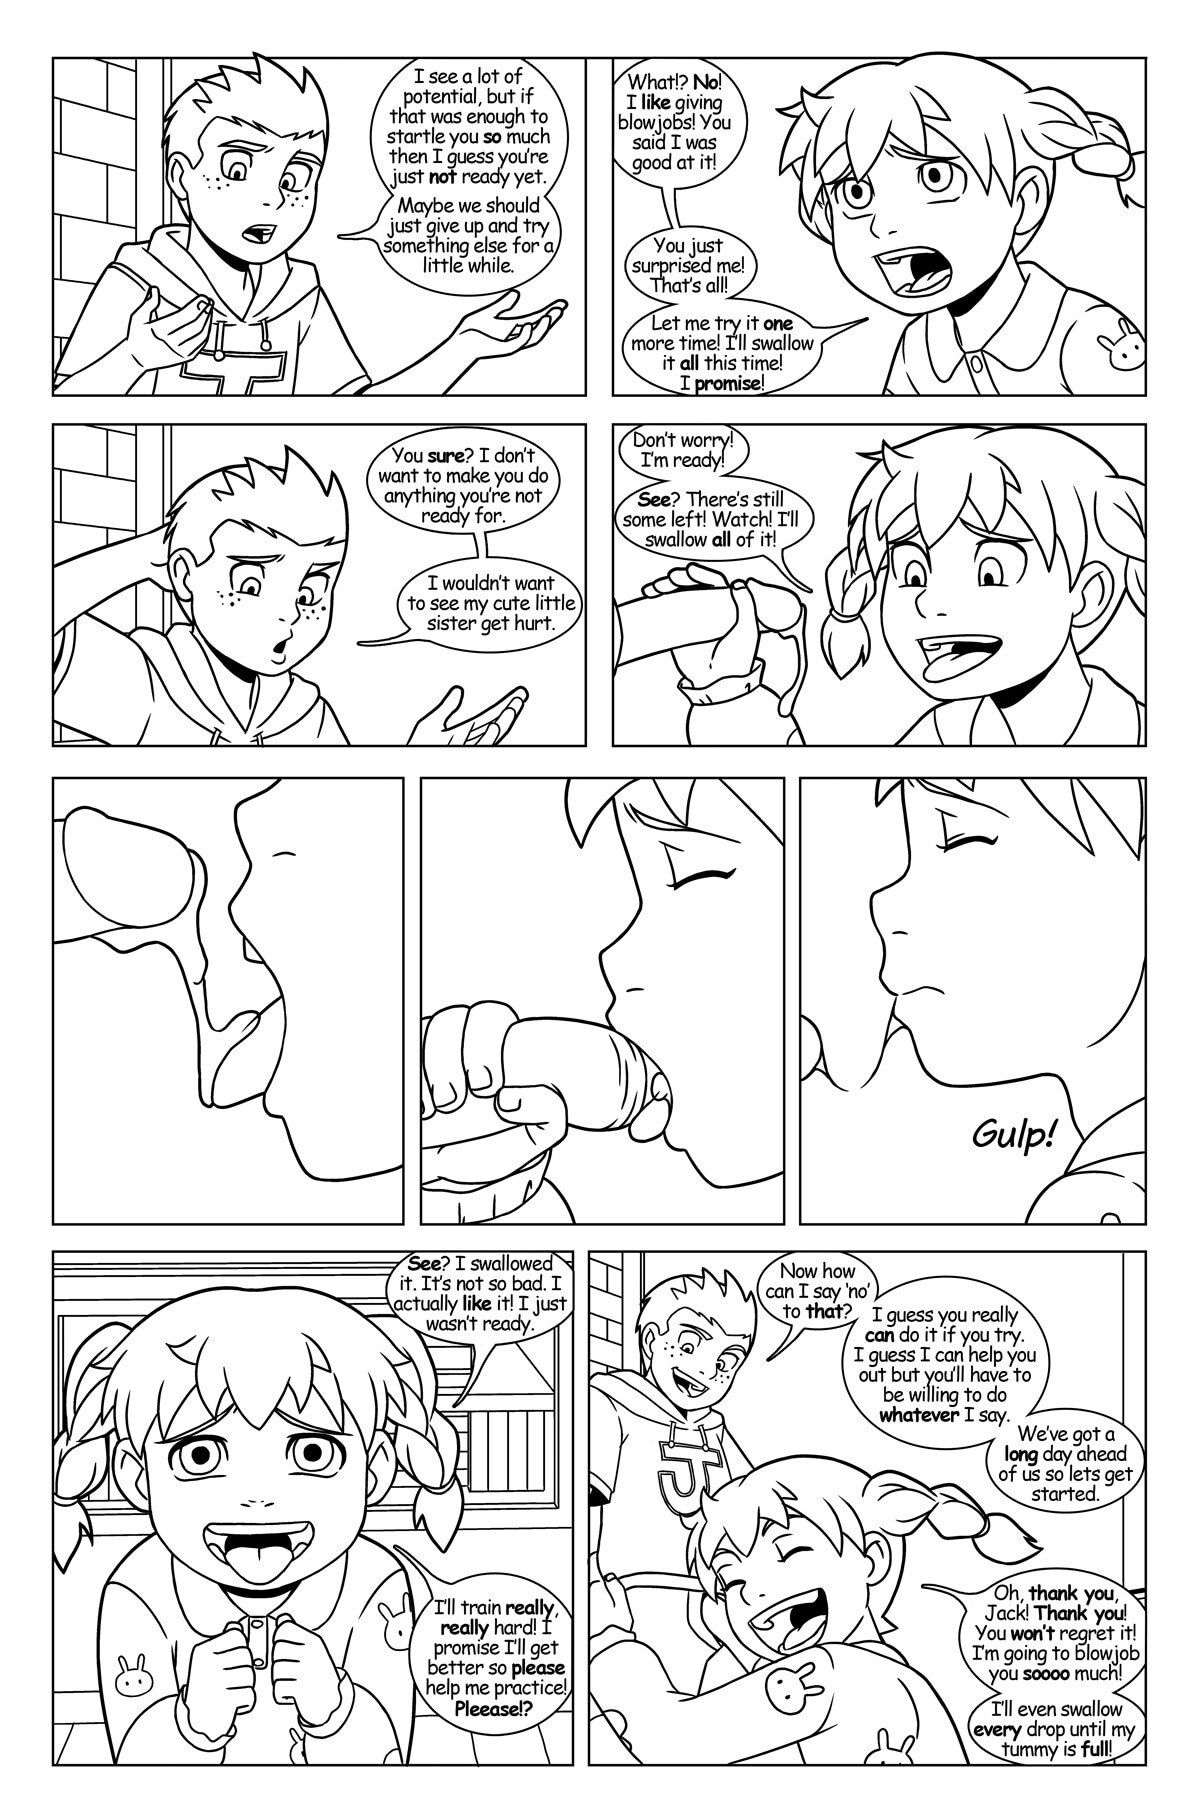 Katie's Training - Page 5